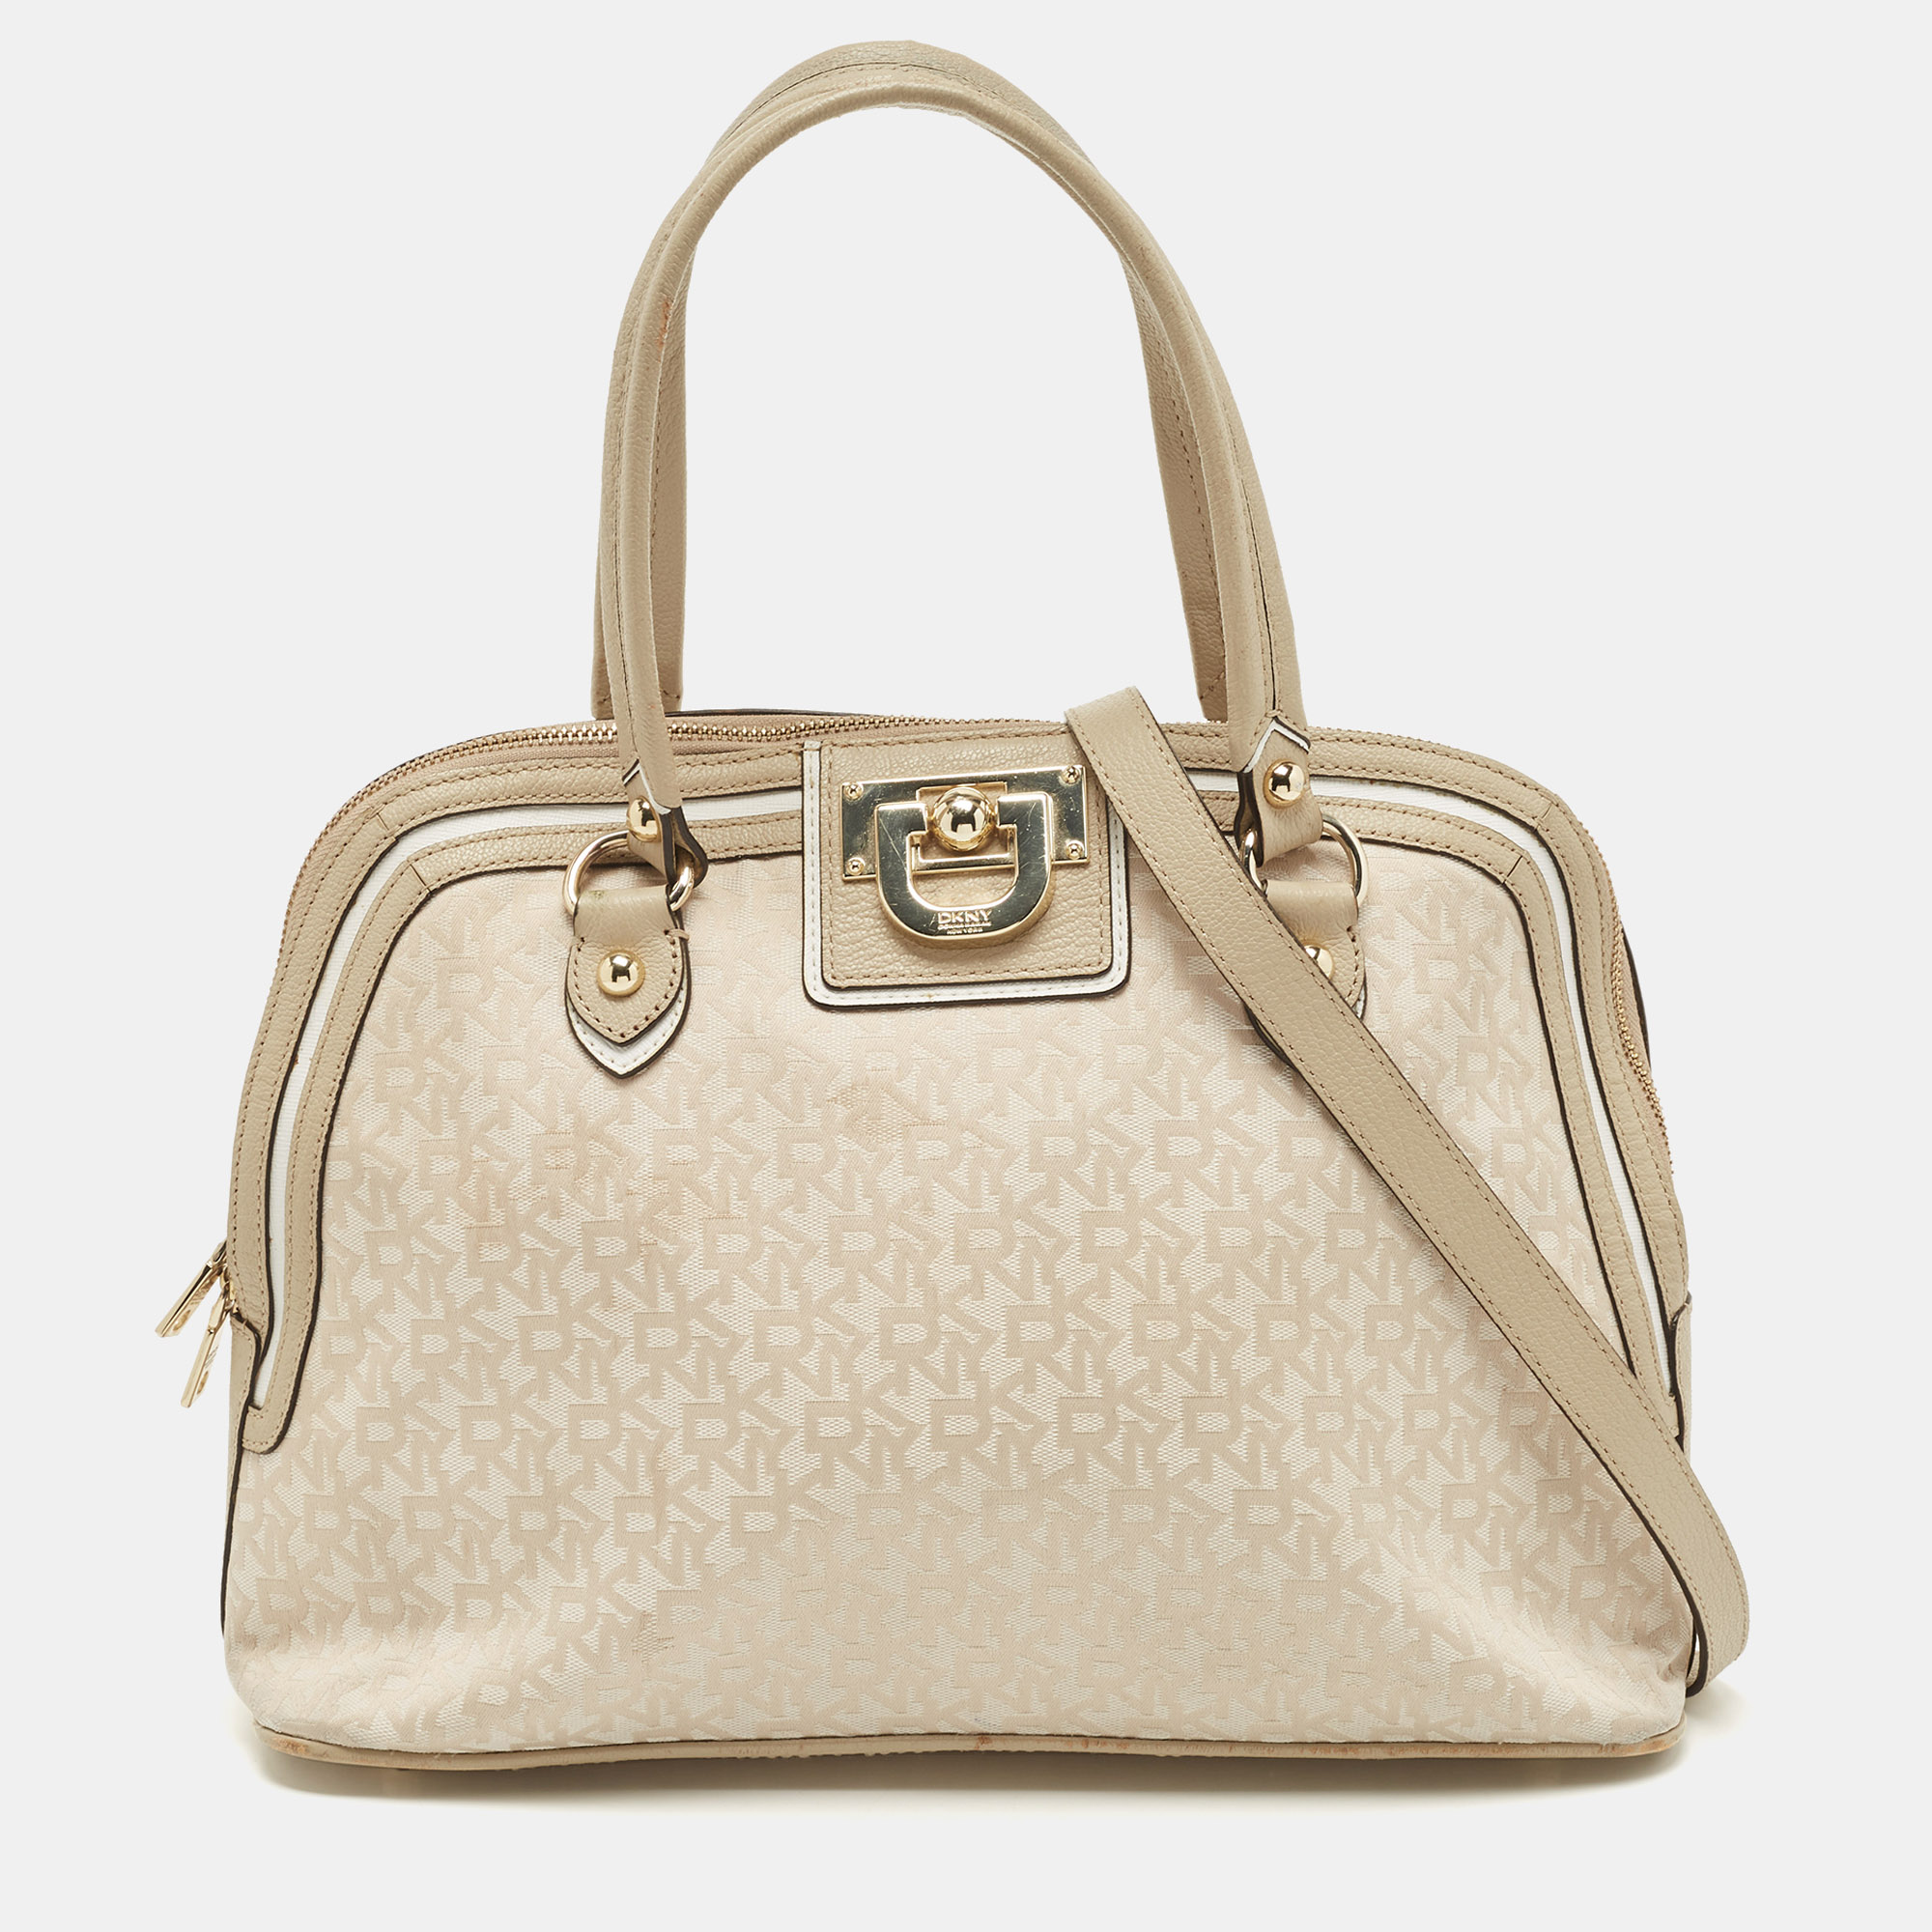 

DKNY Cream/Beige Signature Canvas and Leather Dome Satchel